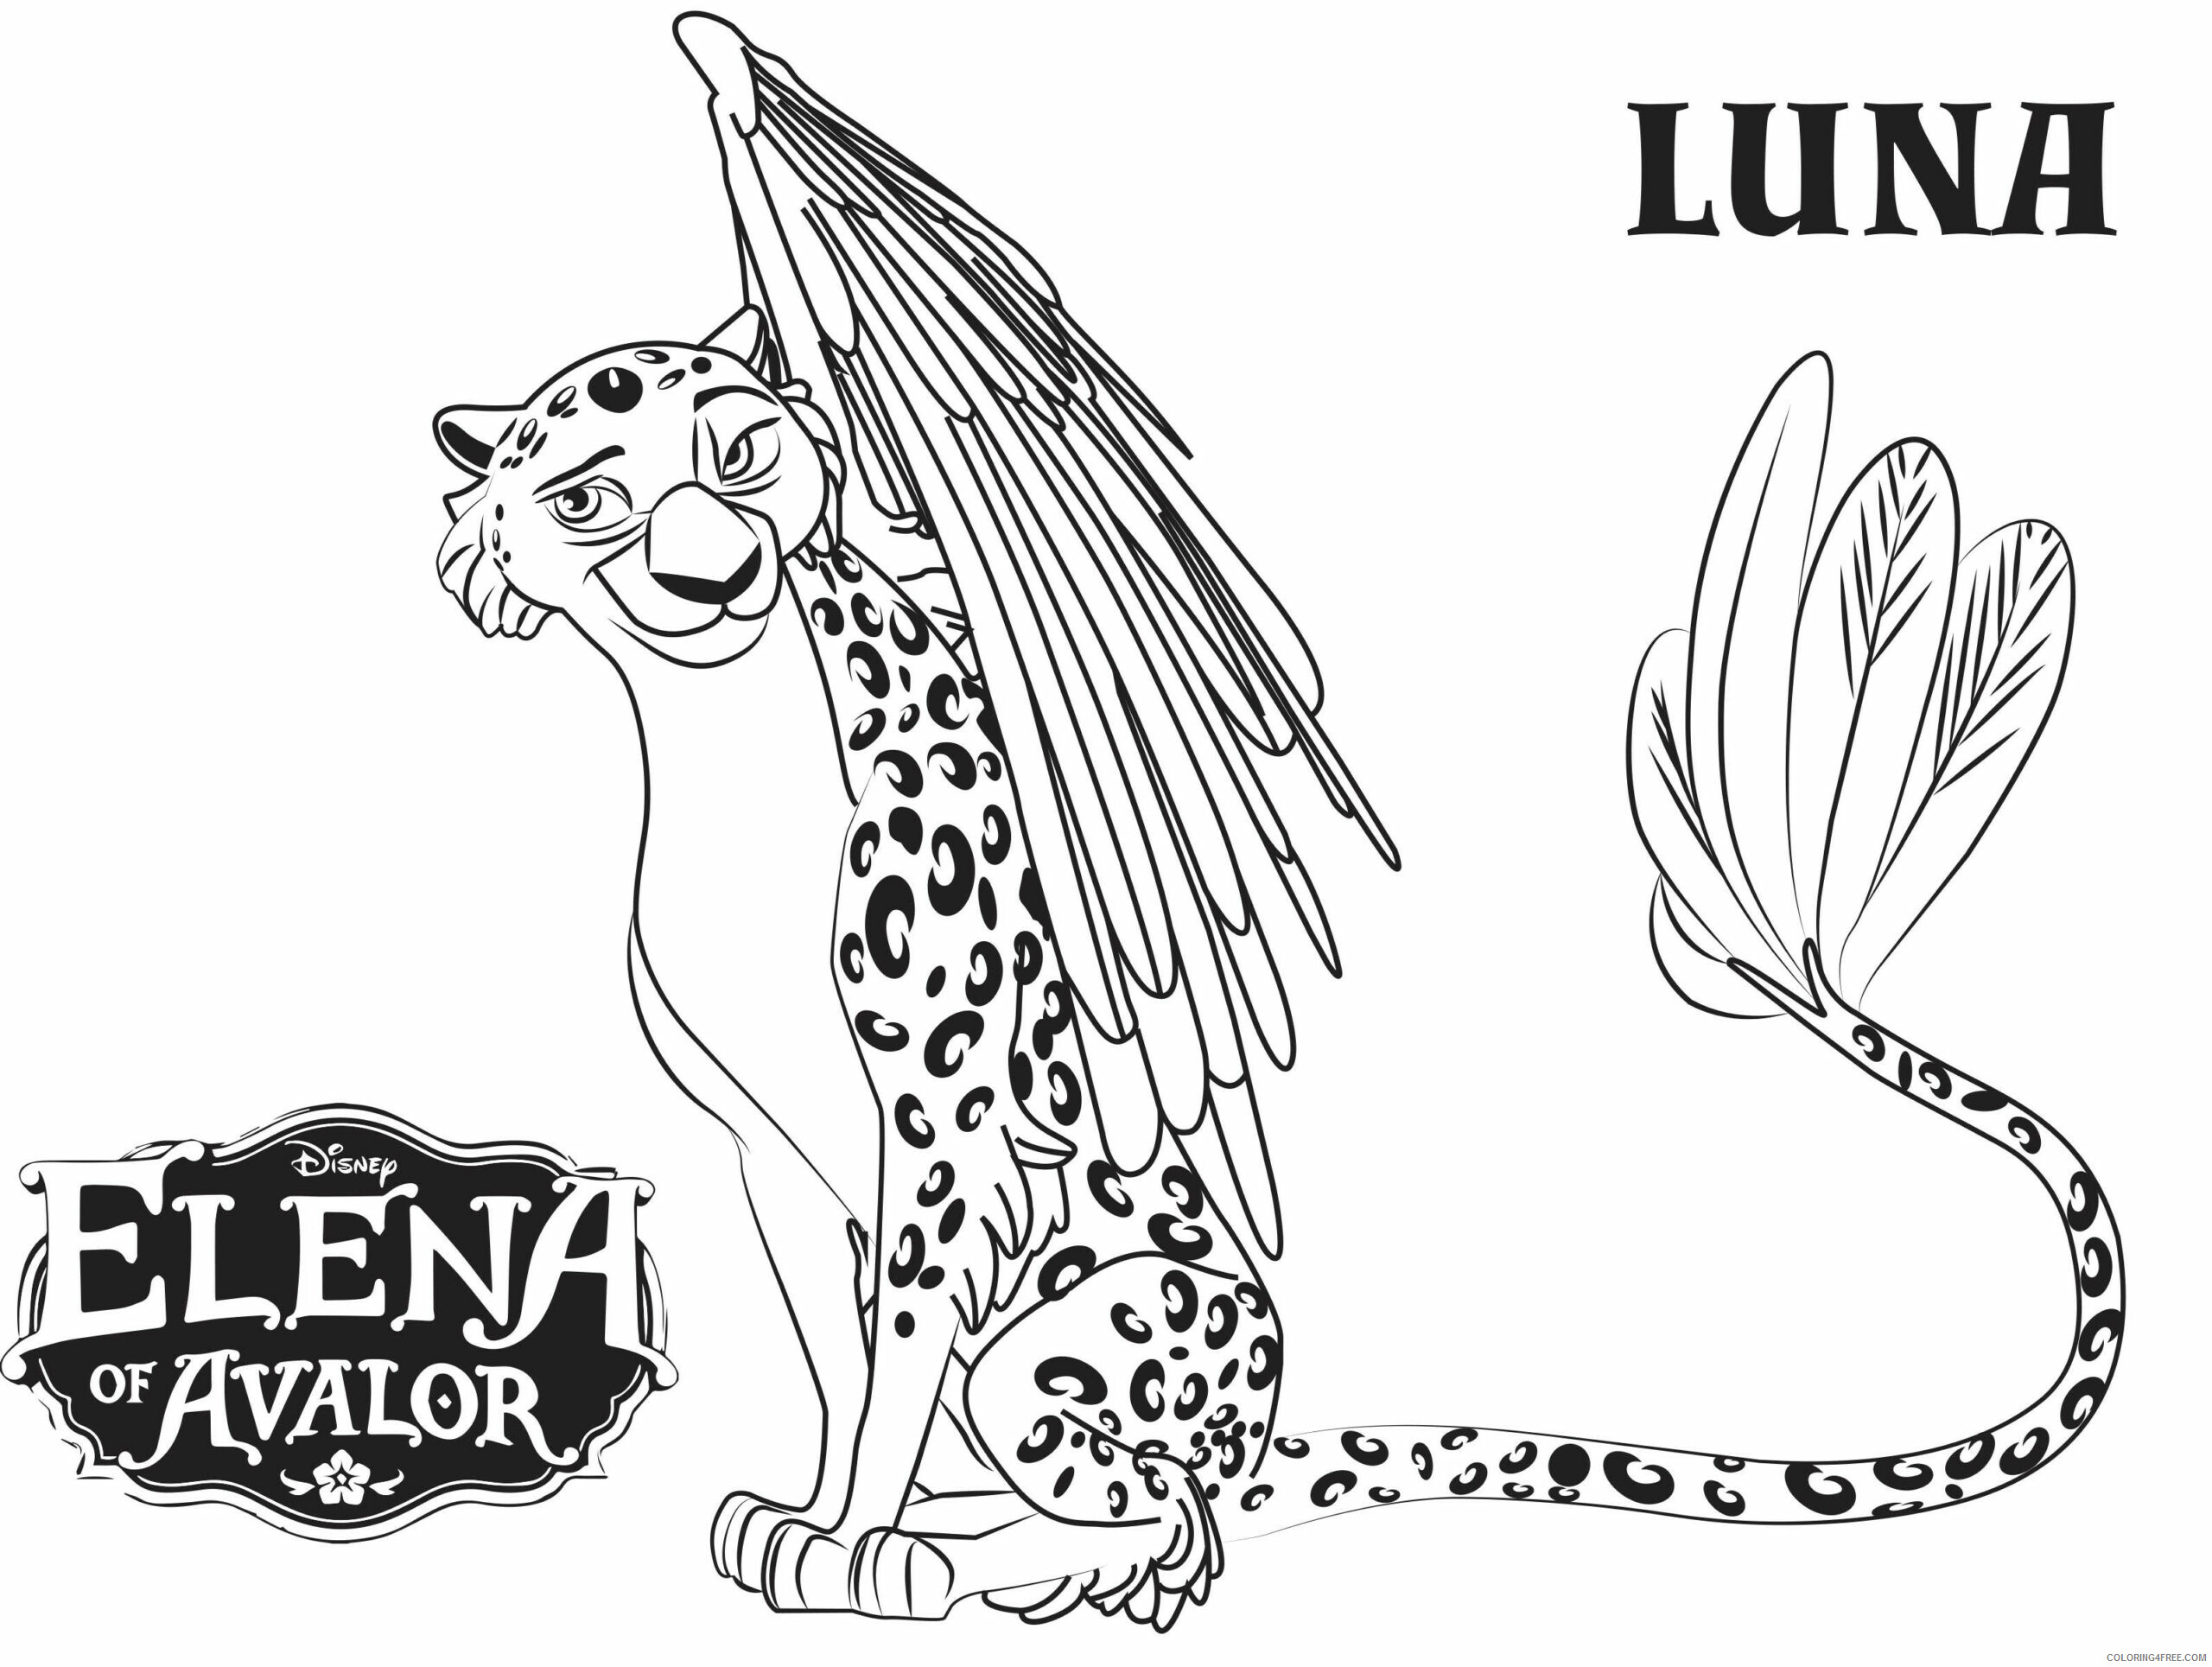 Elena of Avalor Coloring Pages TV Film Elena of Avalor Luna Printable 2020 02635 Coloring4free